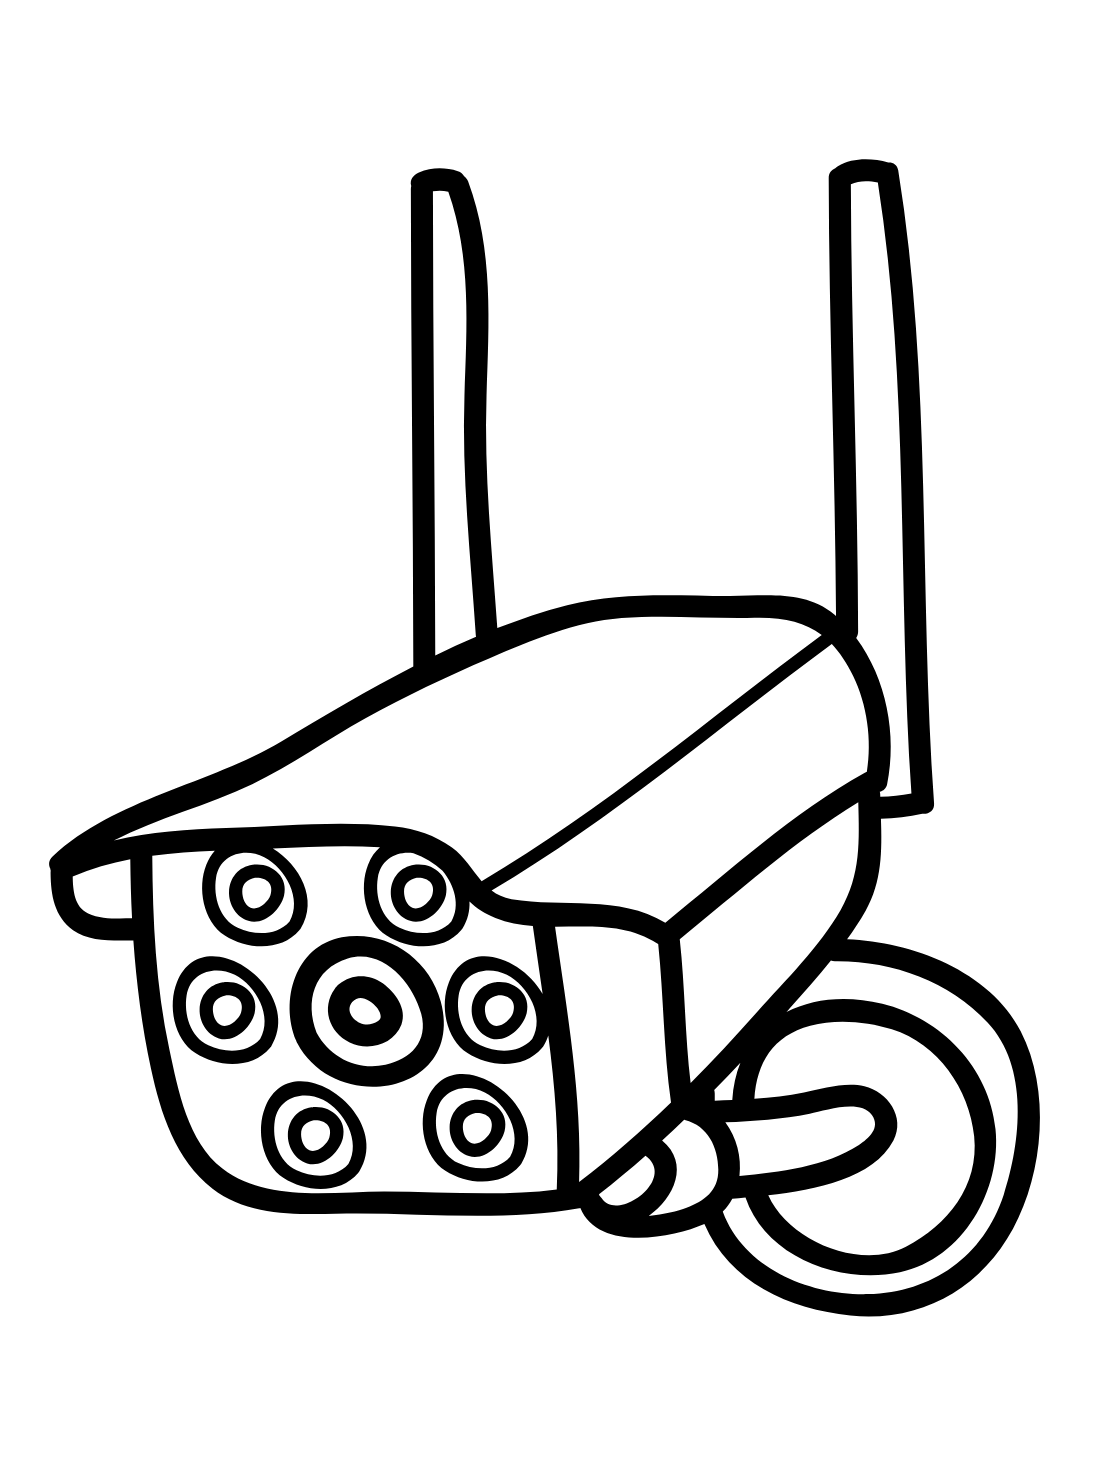 Camera coloring pages for adults